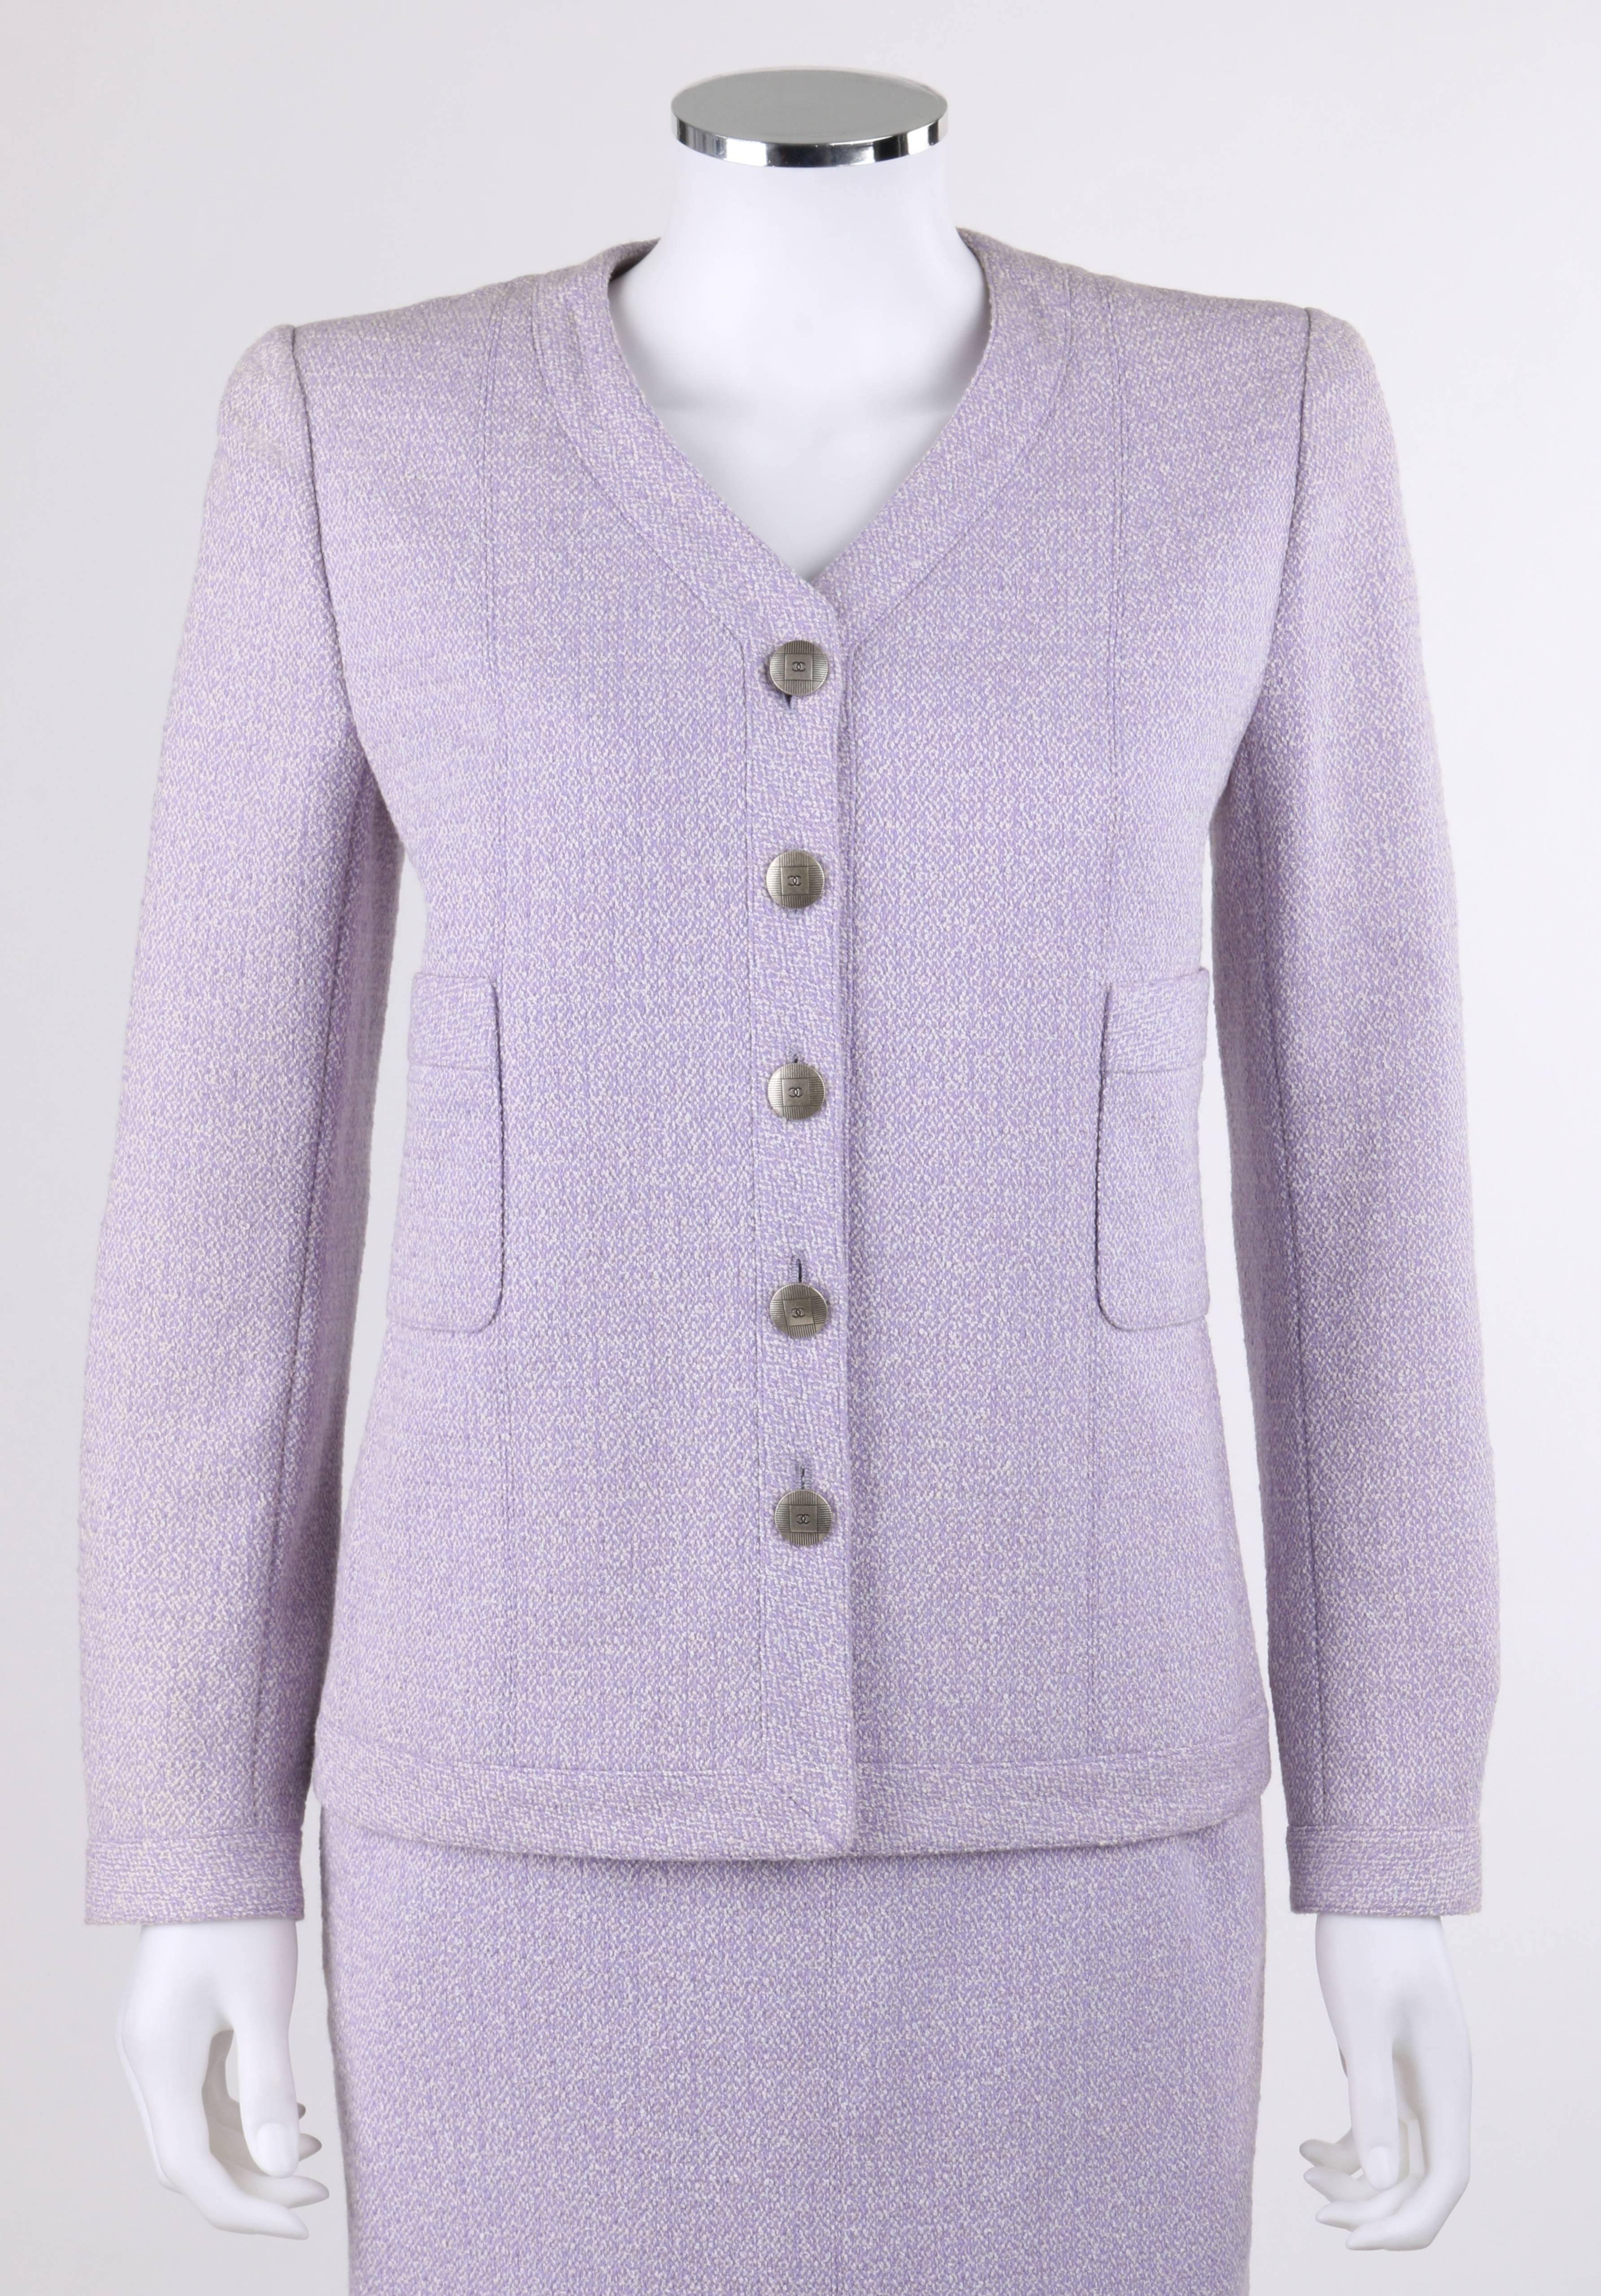 Classic Chanel Spring/Summer 1998 two piece lilac and white wool tweed skirt suit set. Designed by Karl Kagerfeld. V-neckline blazer. Long sleeves with three button closures at cuff. Five center front button closures. Silver-toned round 